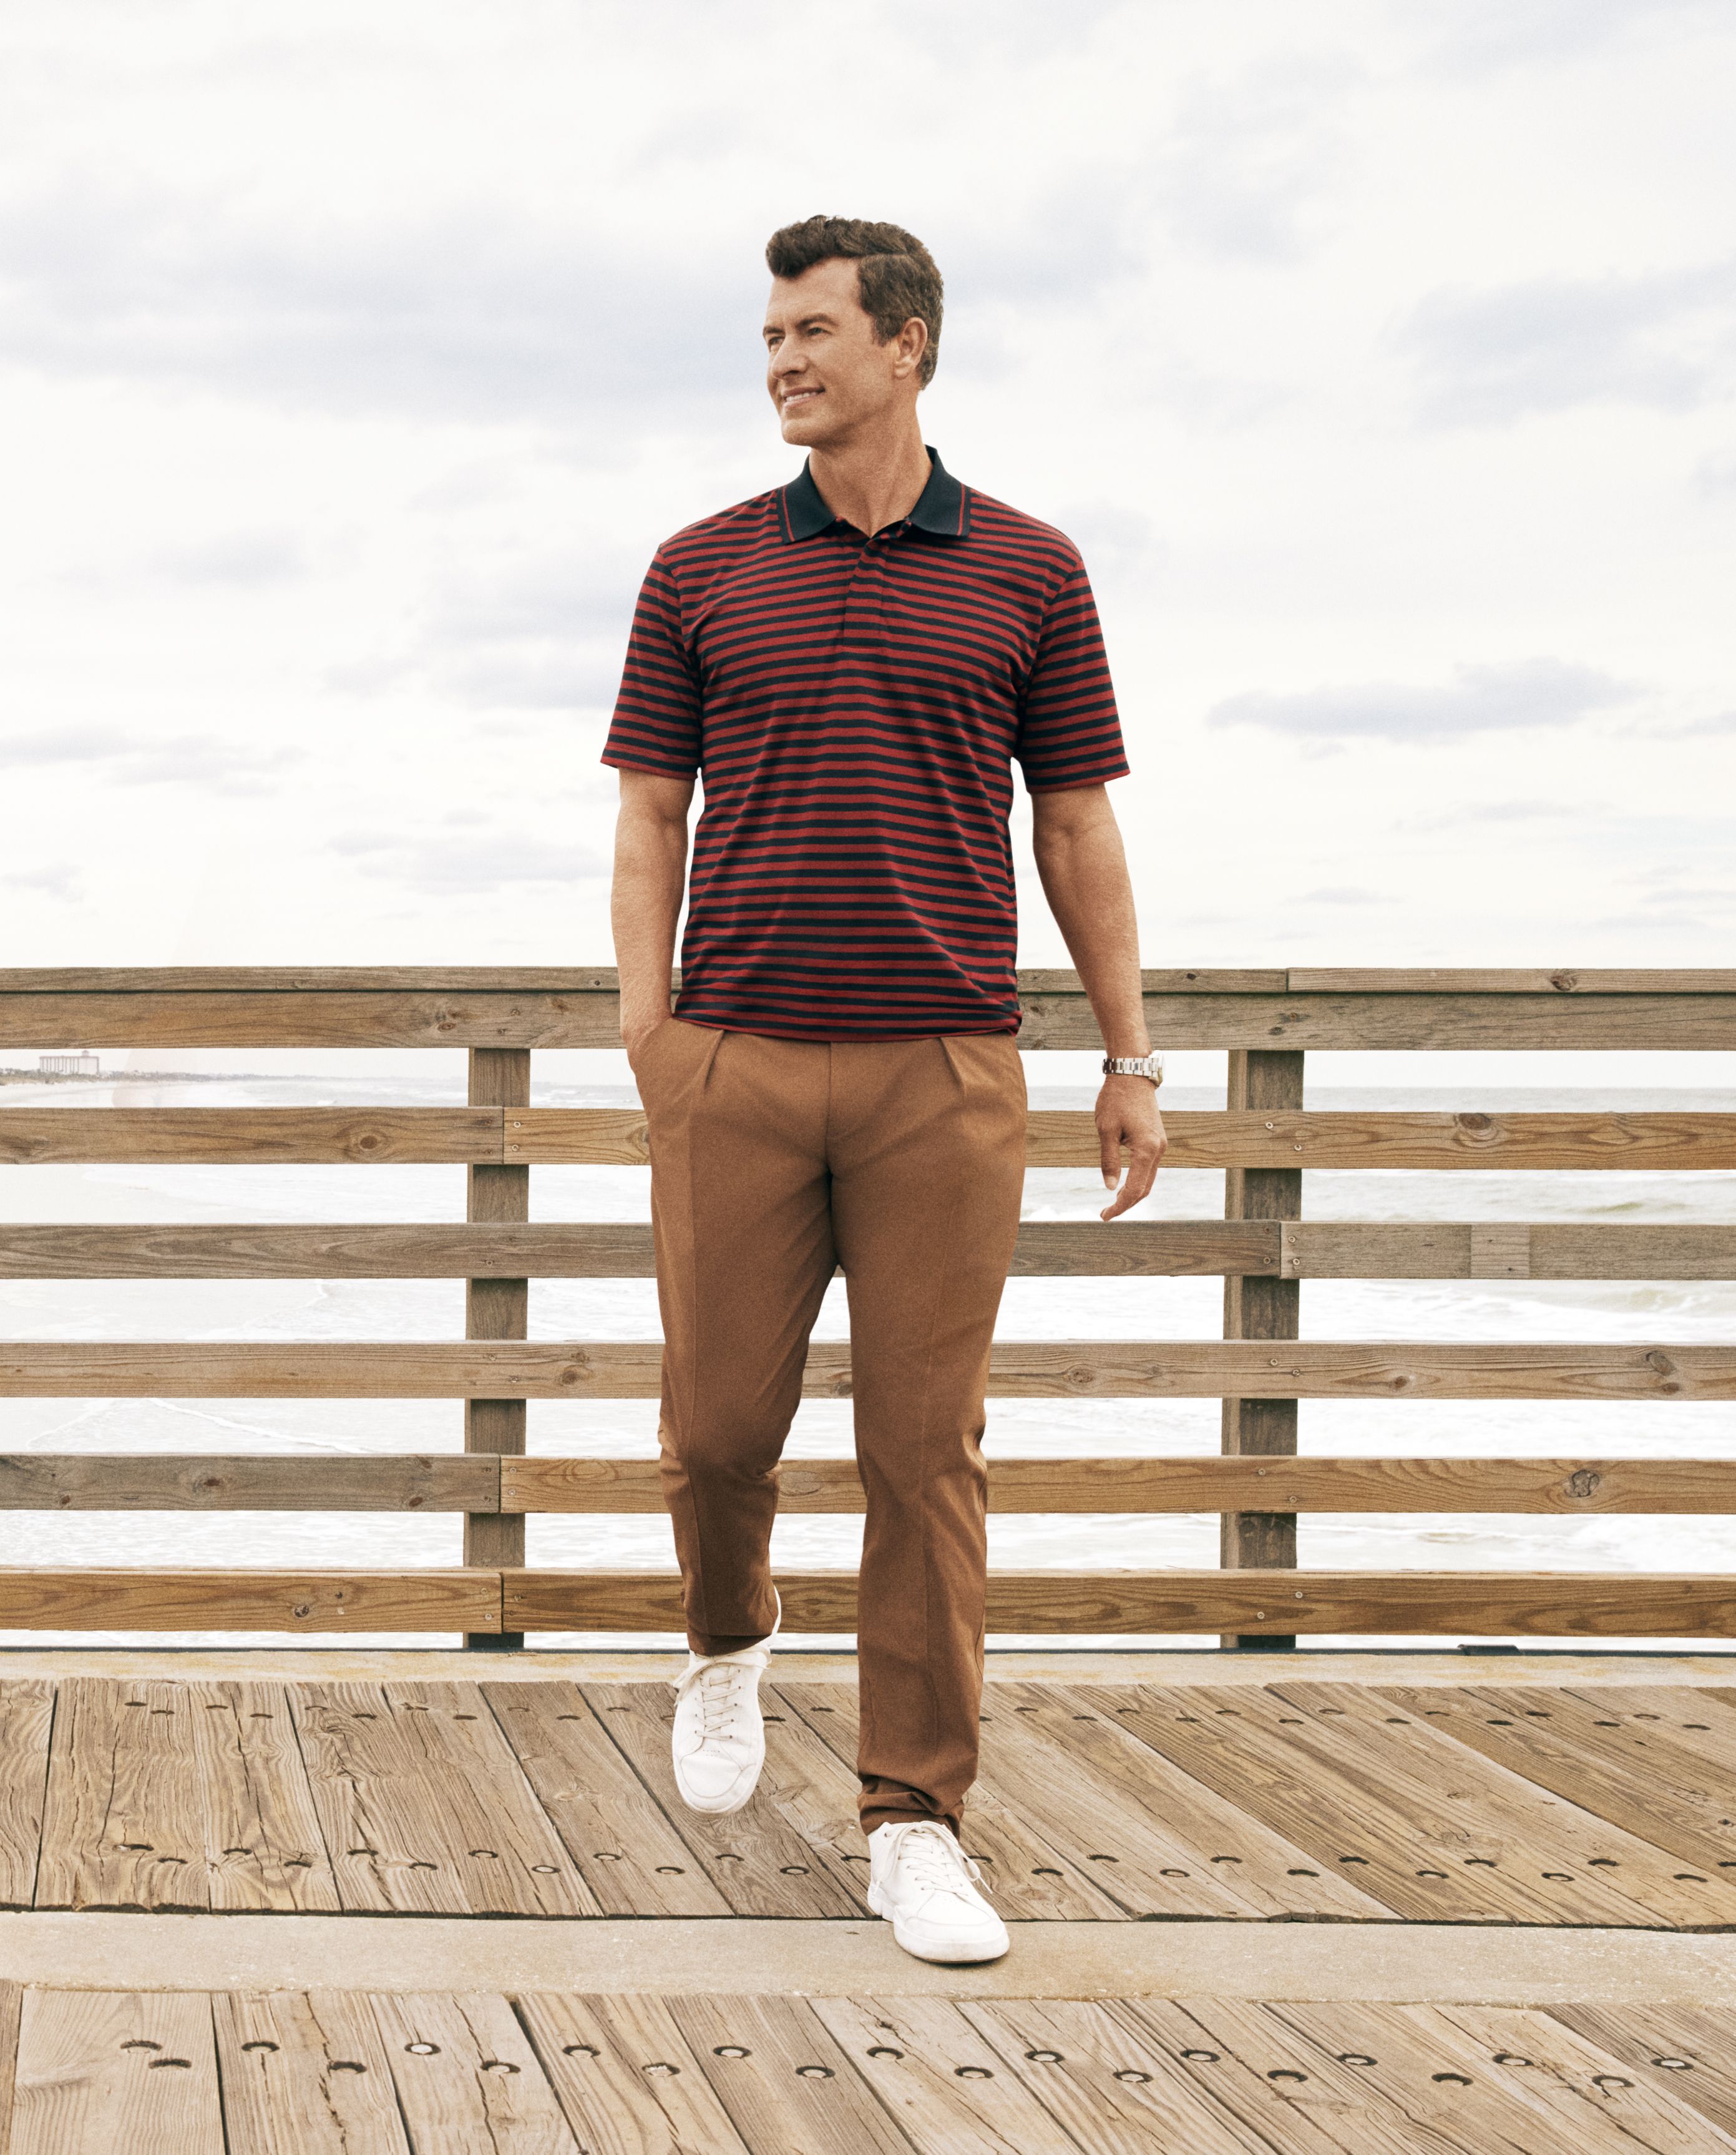 Uniqlo x Adam Scott Golf Clothing Review  The Best Low Budget Golf  Clothing  YouTube